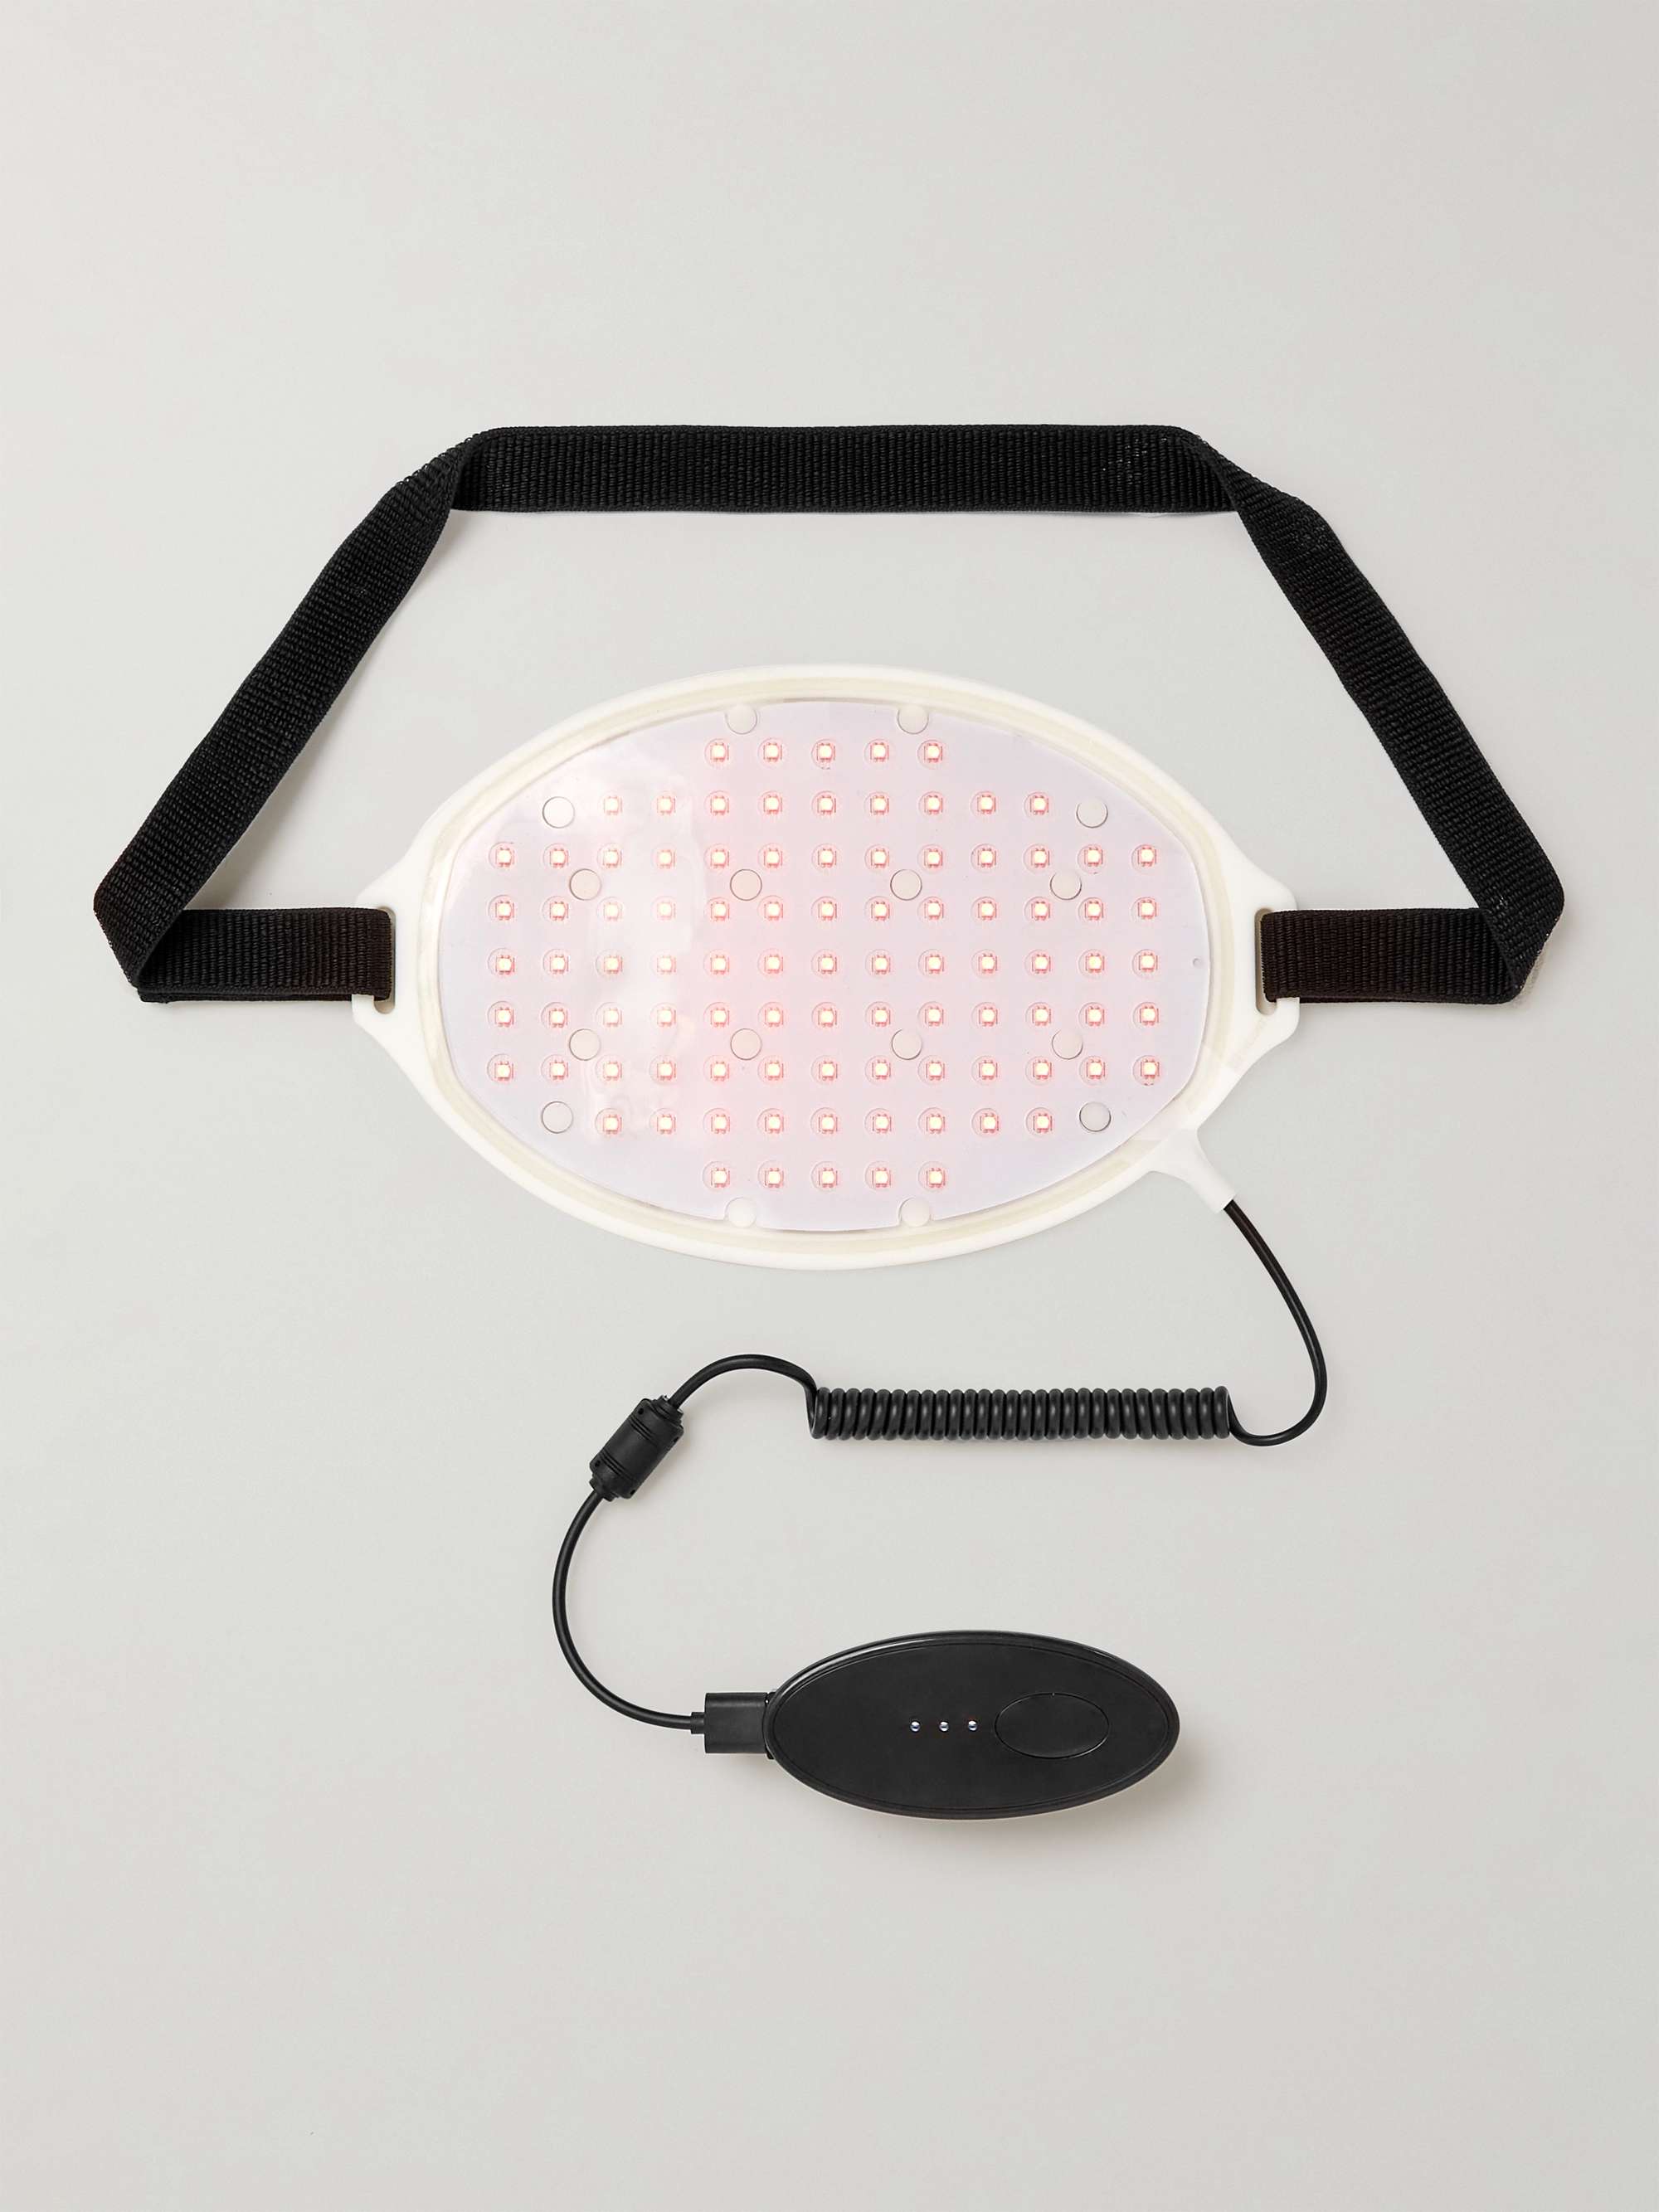 THE LIGHT SALON Boost LED Light Therapy Patch